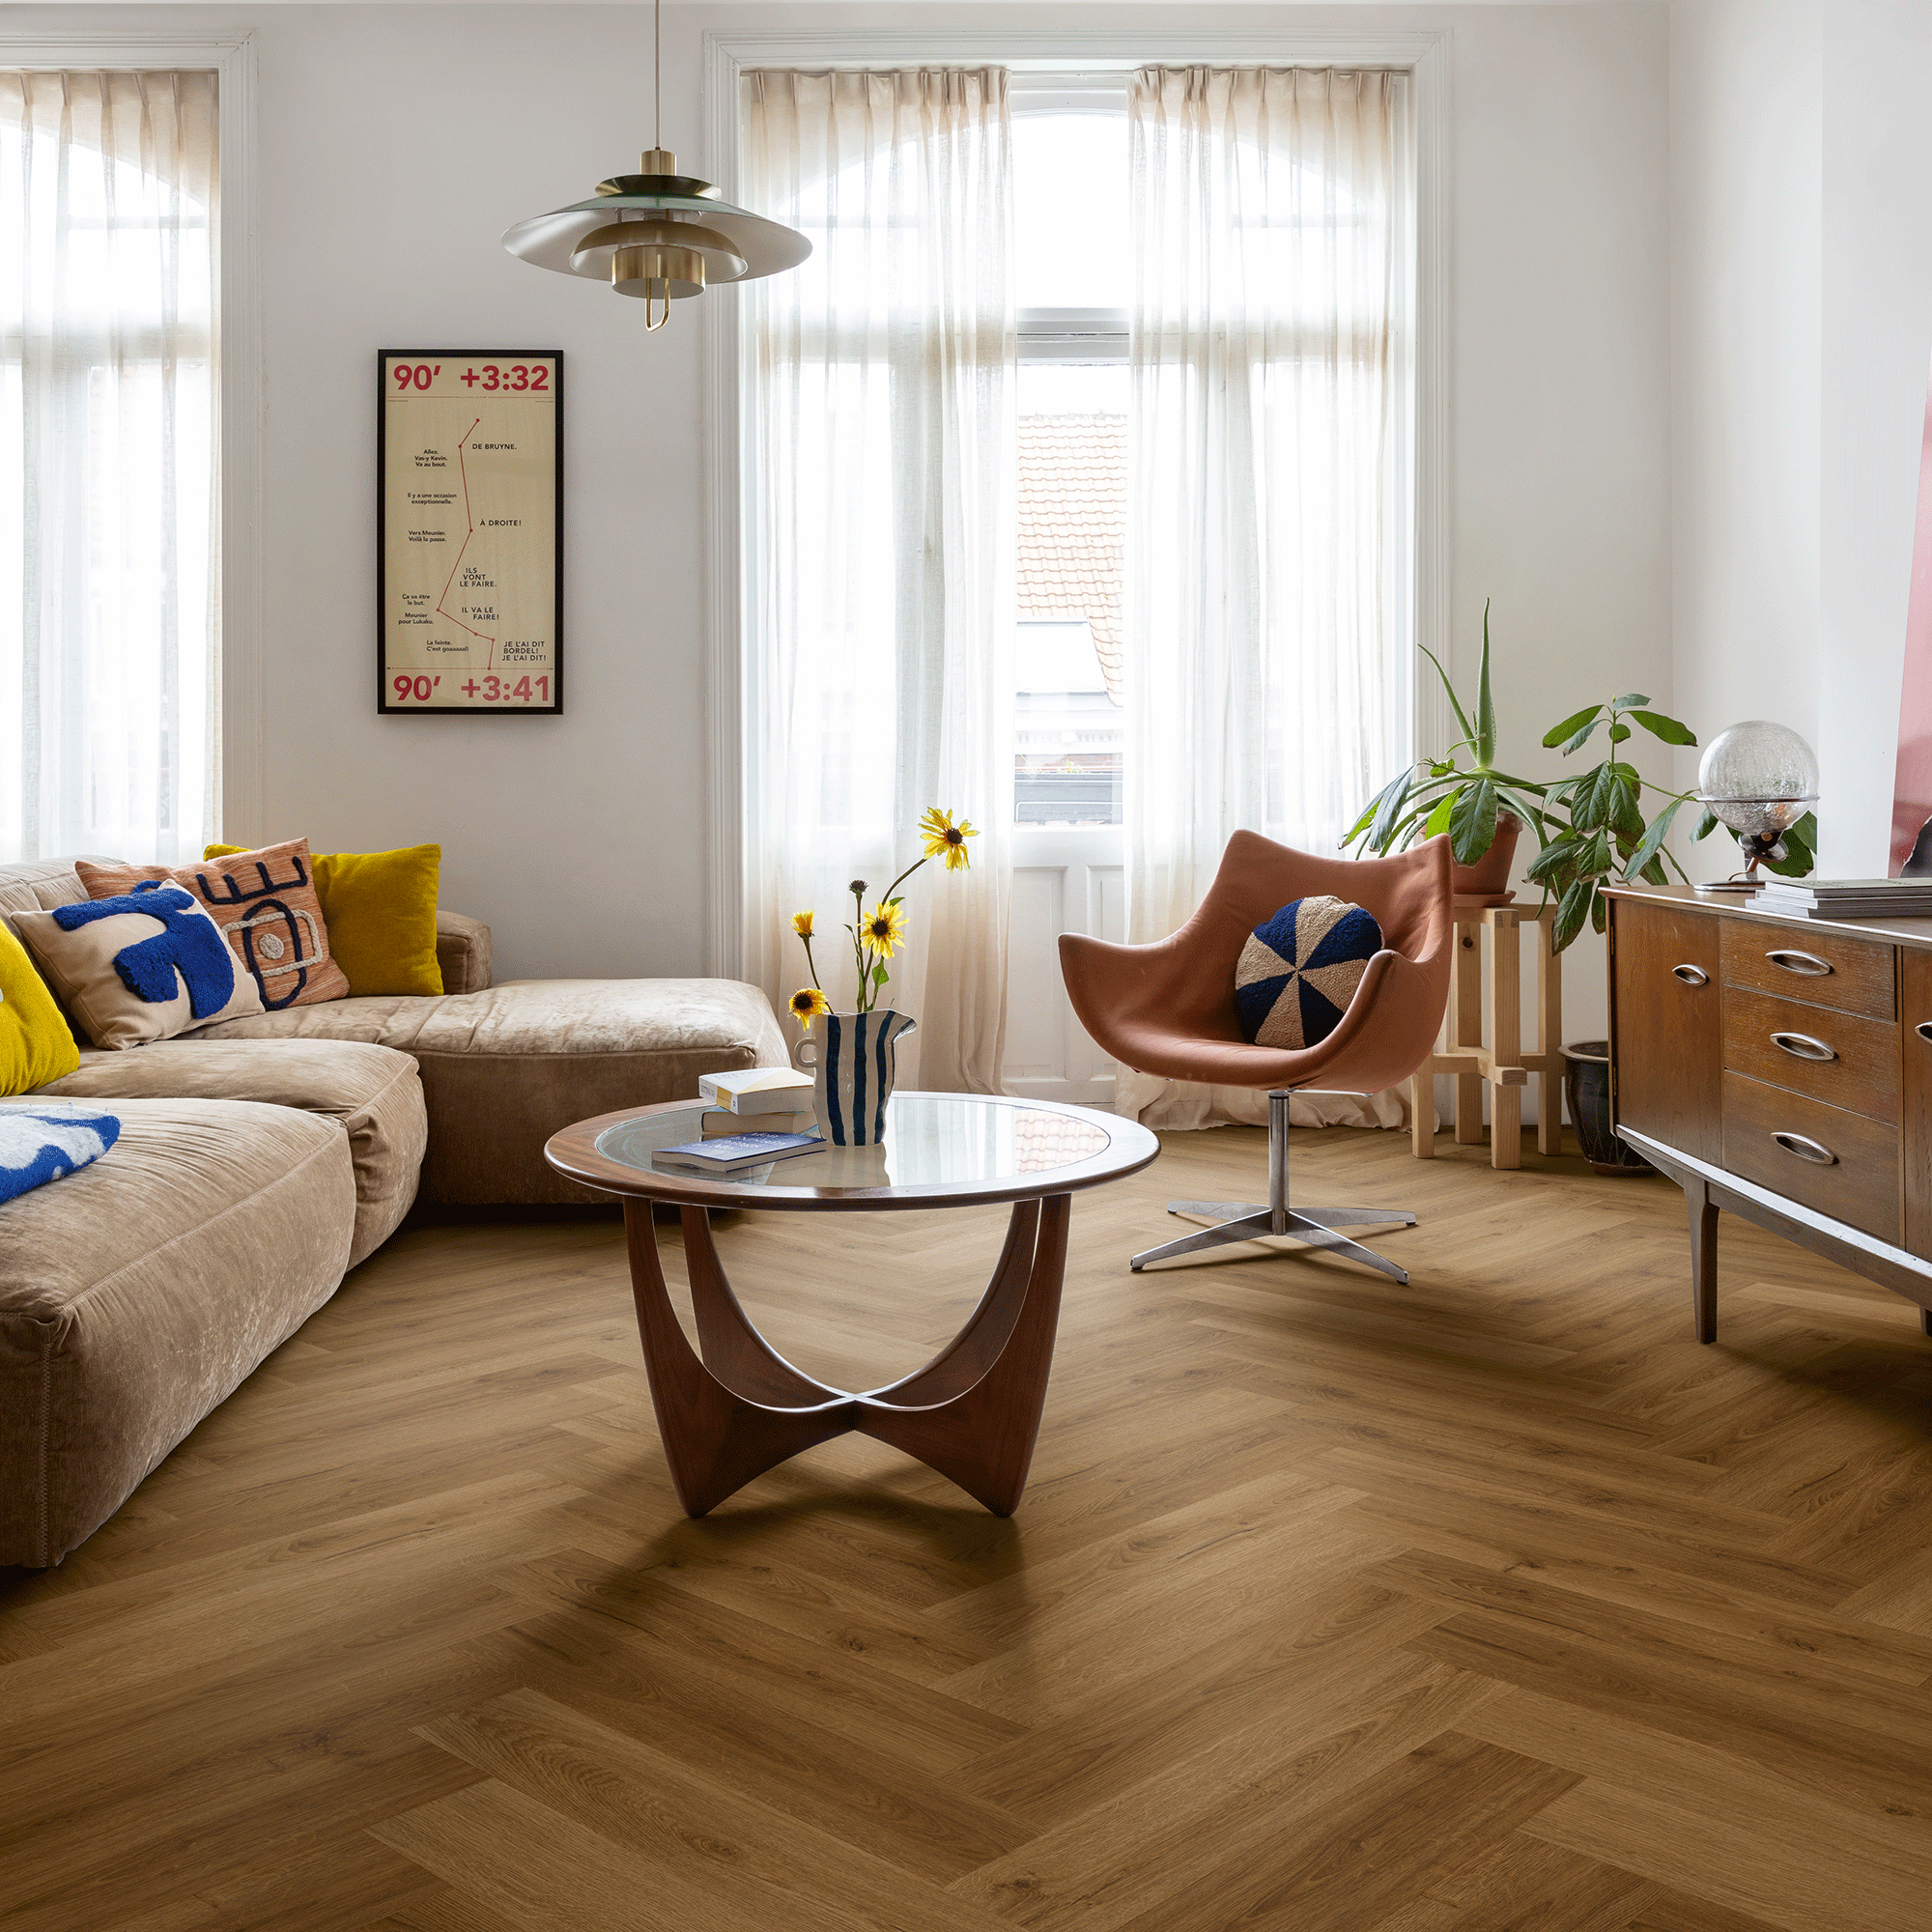 The best ways to clean laminate floors to last for years